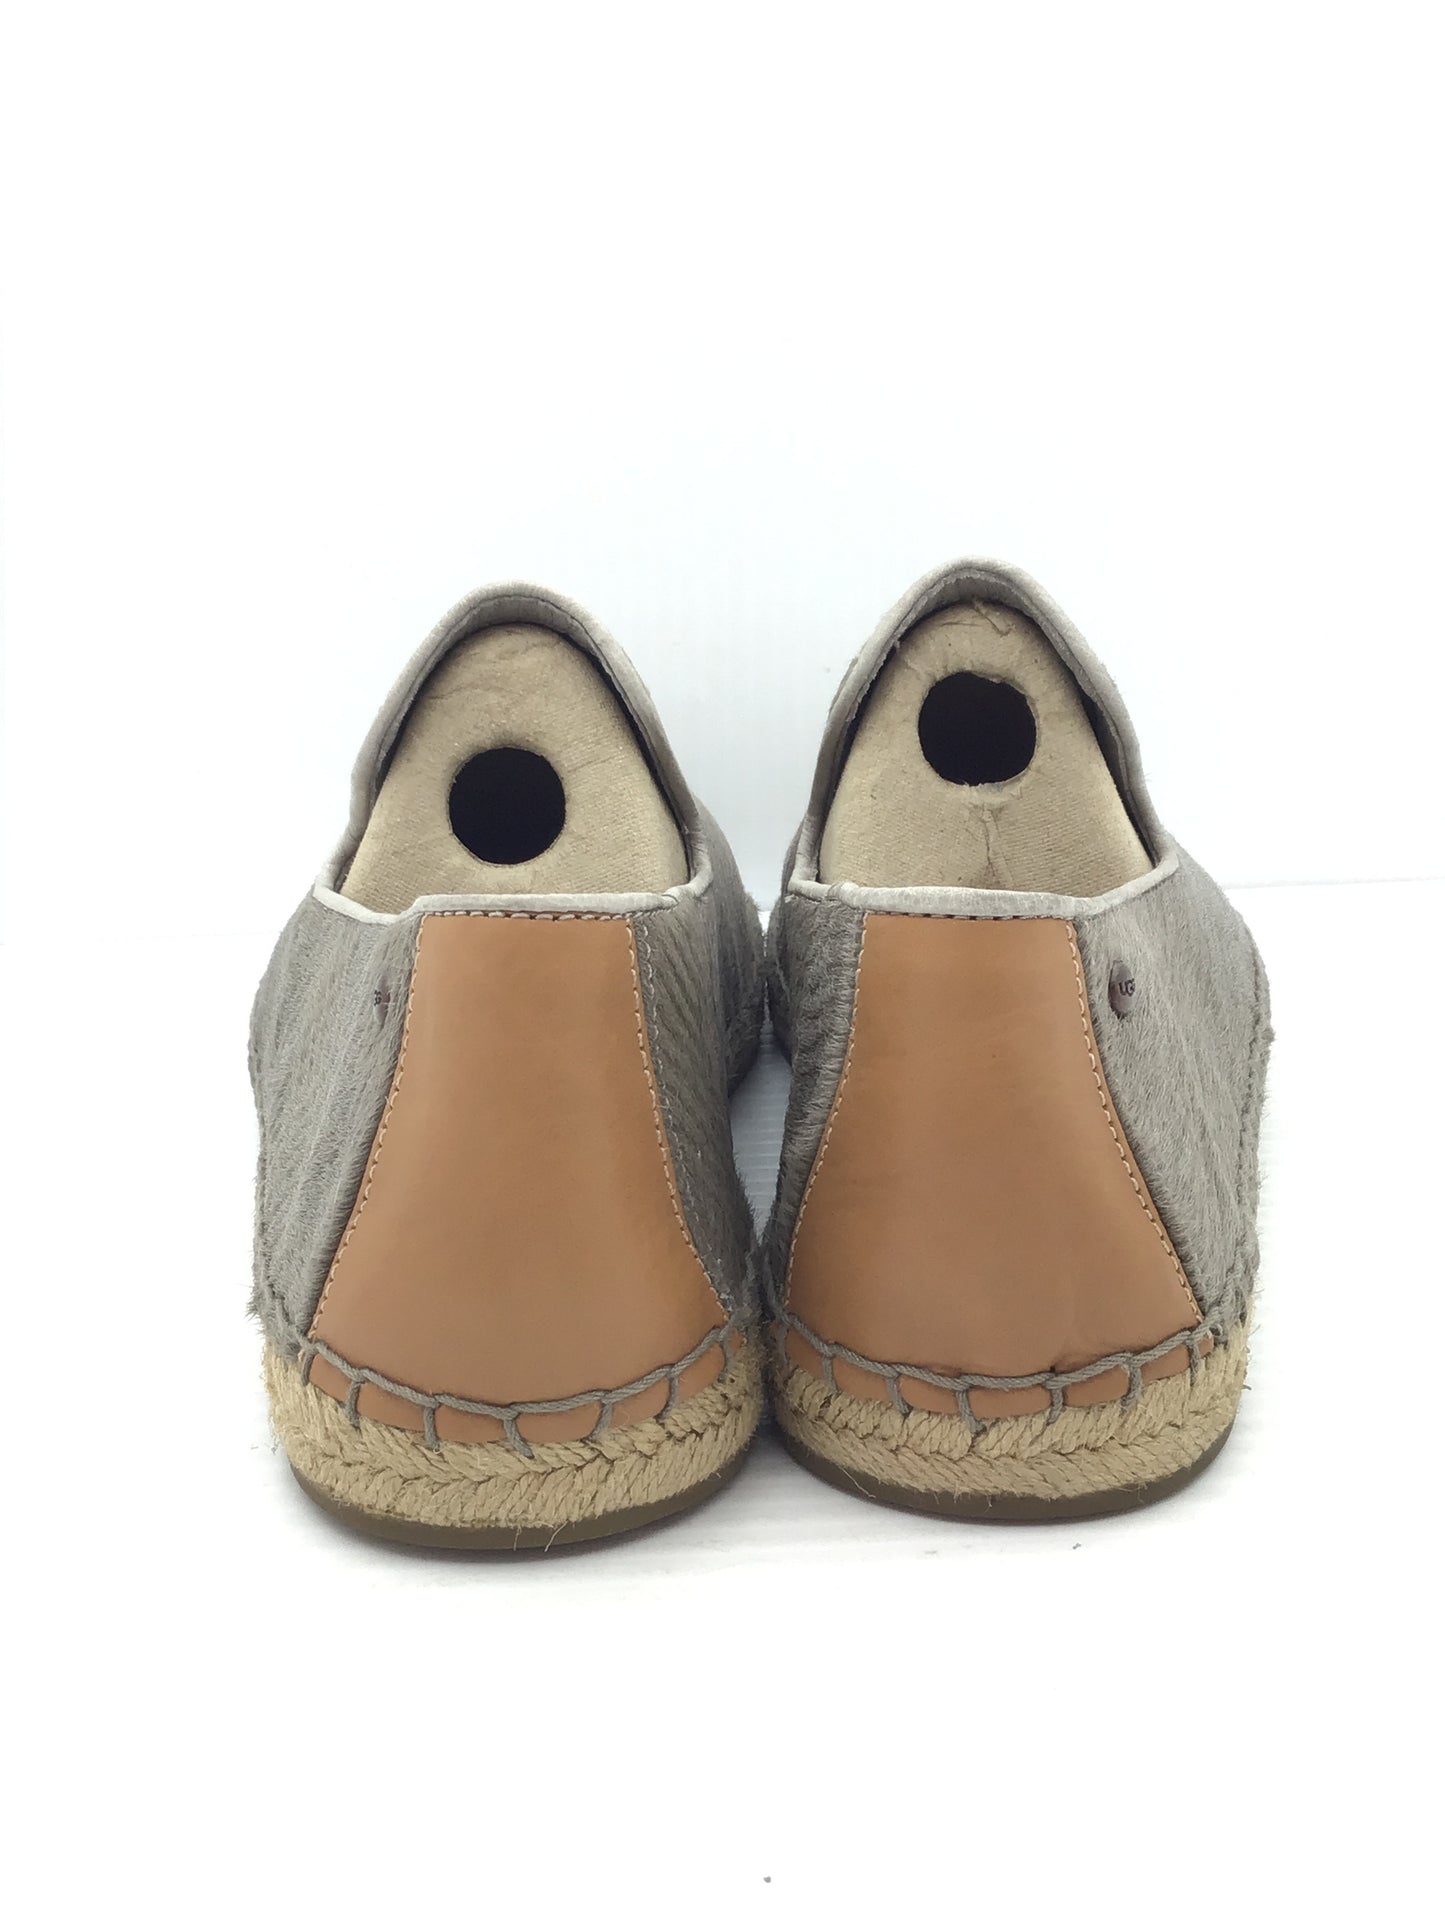 Shoes Flats Espadrille By Ugg  Size: 10